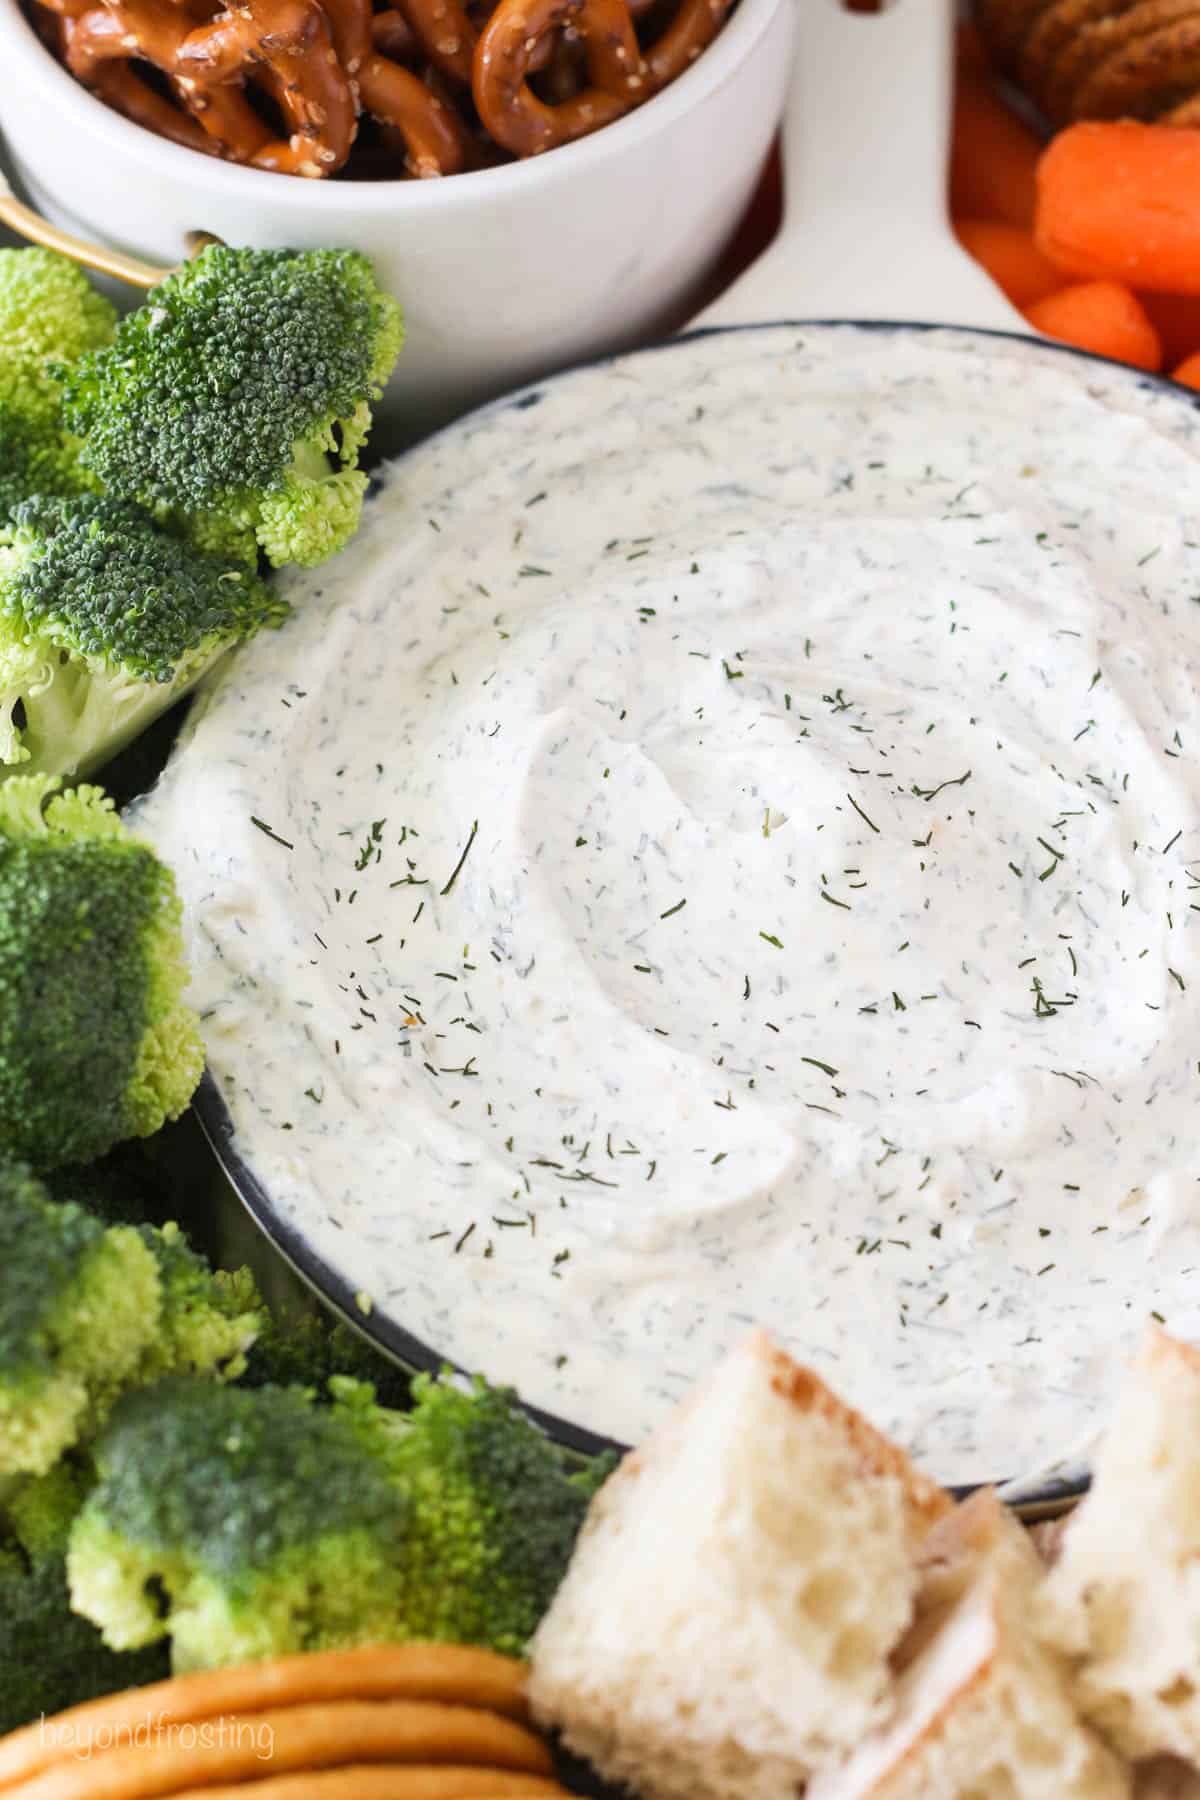 A bowl of dill dip next to broccoli